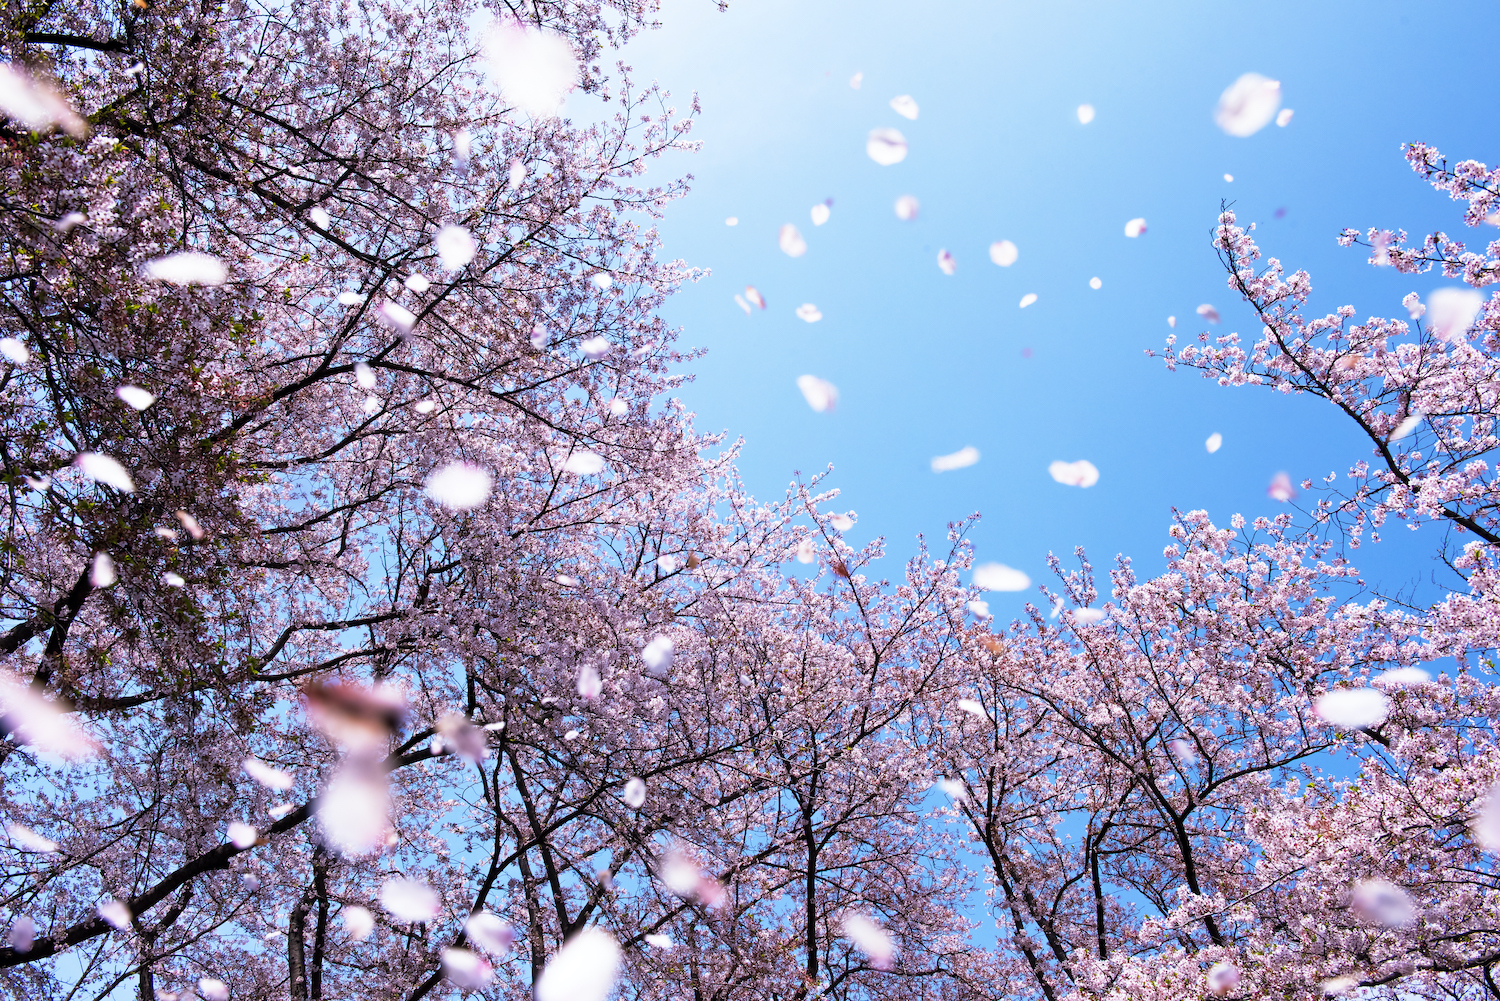 Magnificent scene of cherry blossoms flower petals floating and blown in a spring breeze. The focus is the background trees.